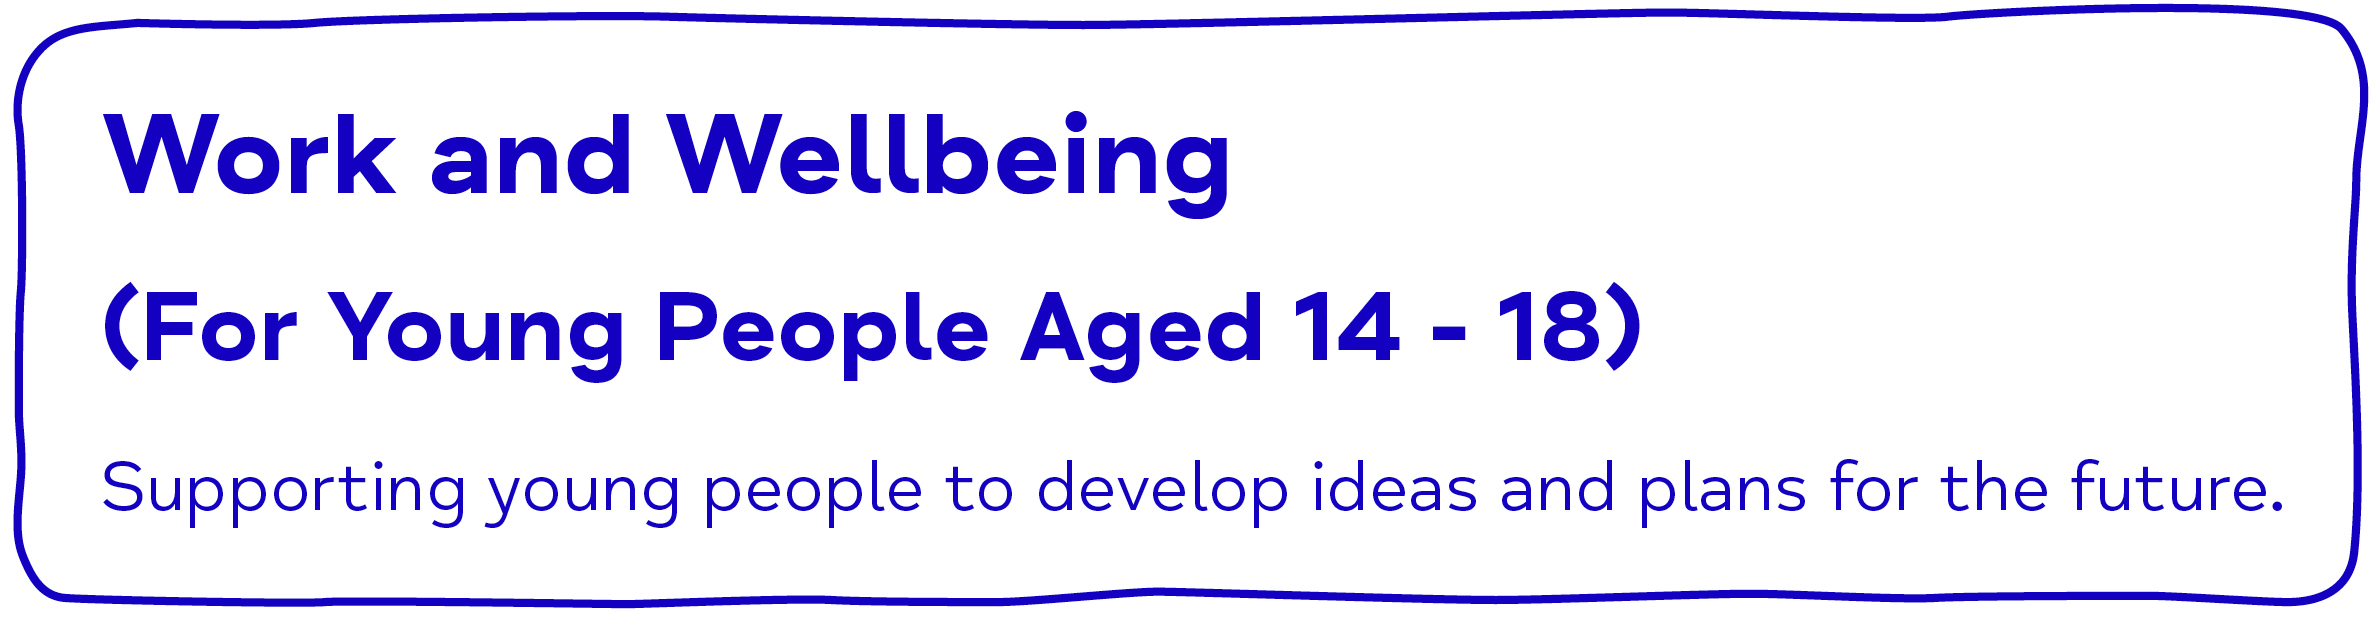 Work and Wellbeing (For young people aged 14-18). Supporting young people to develop ideas and plans for the future.